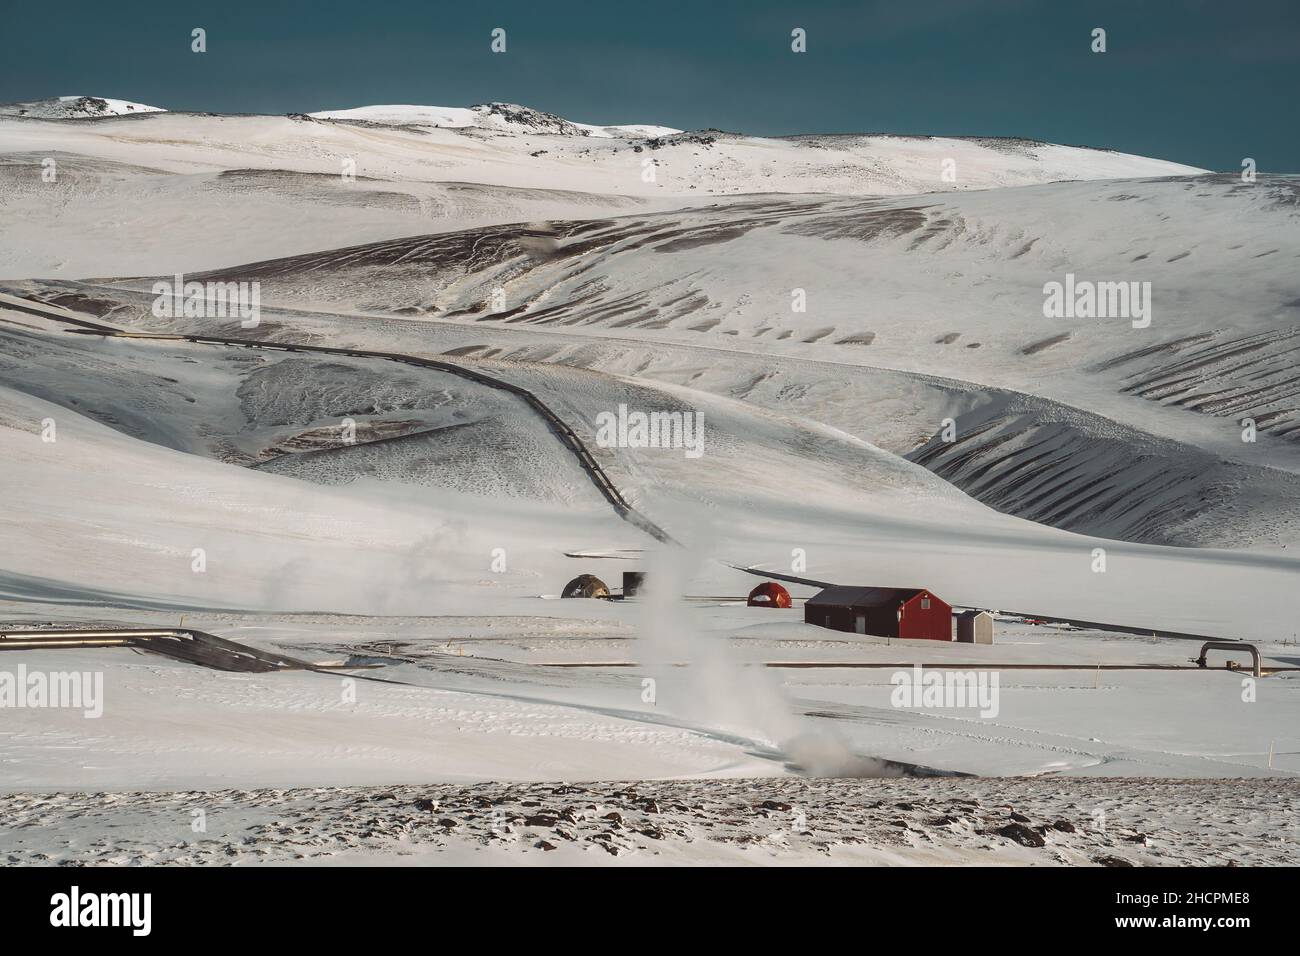 Icelandic landscape with geothermal power plant station kravla with igloo huts and pipes in the valley. Myvatn lake surroundings, Iceland Stock Photo